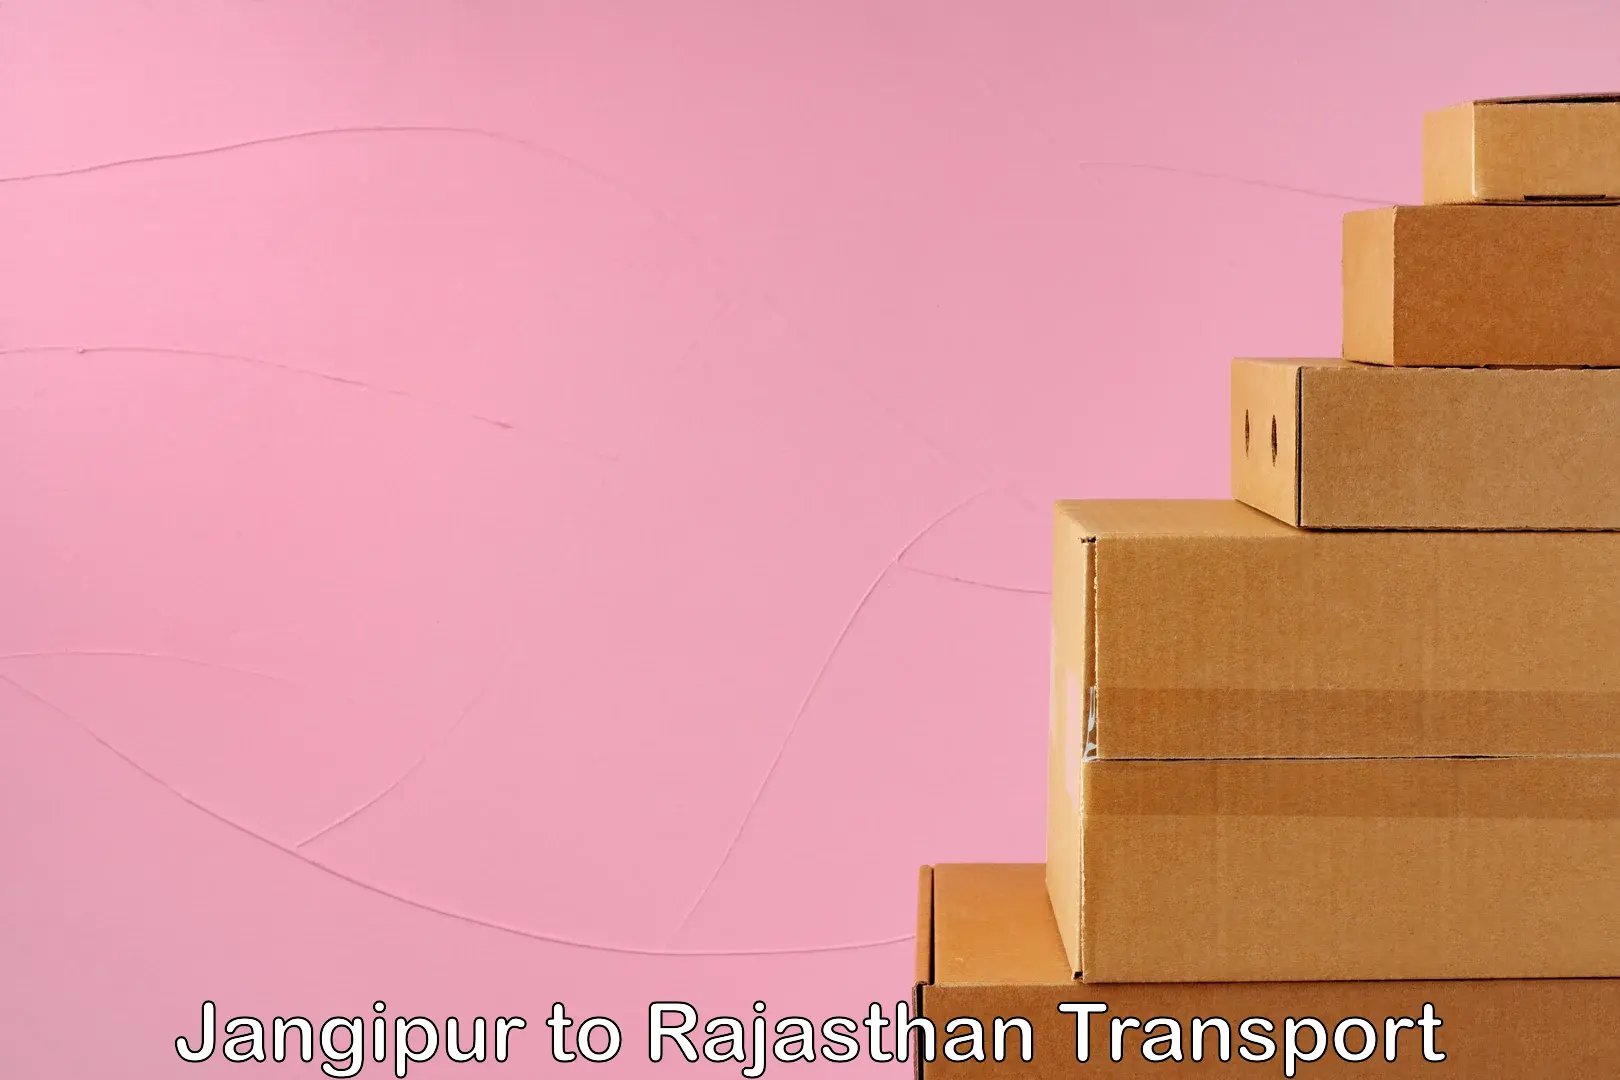 Goods delivery service Jangipur to Rajasthan